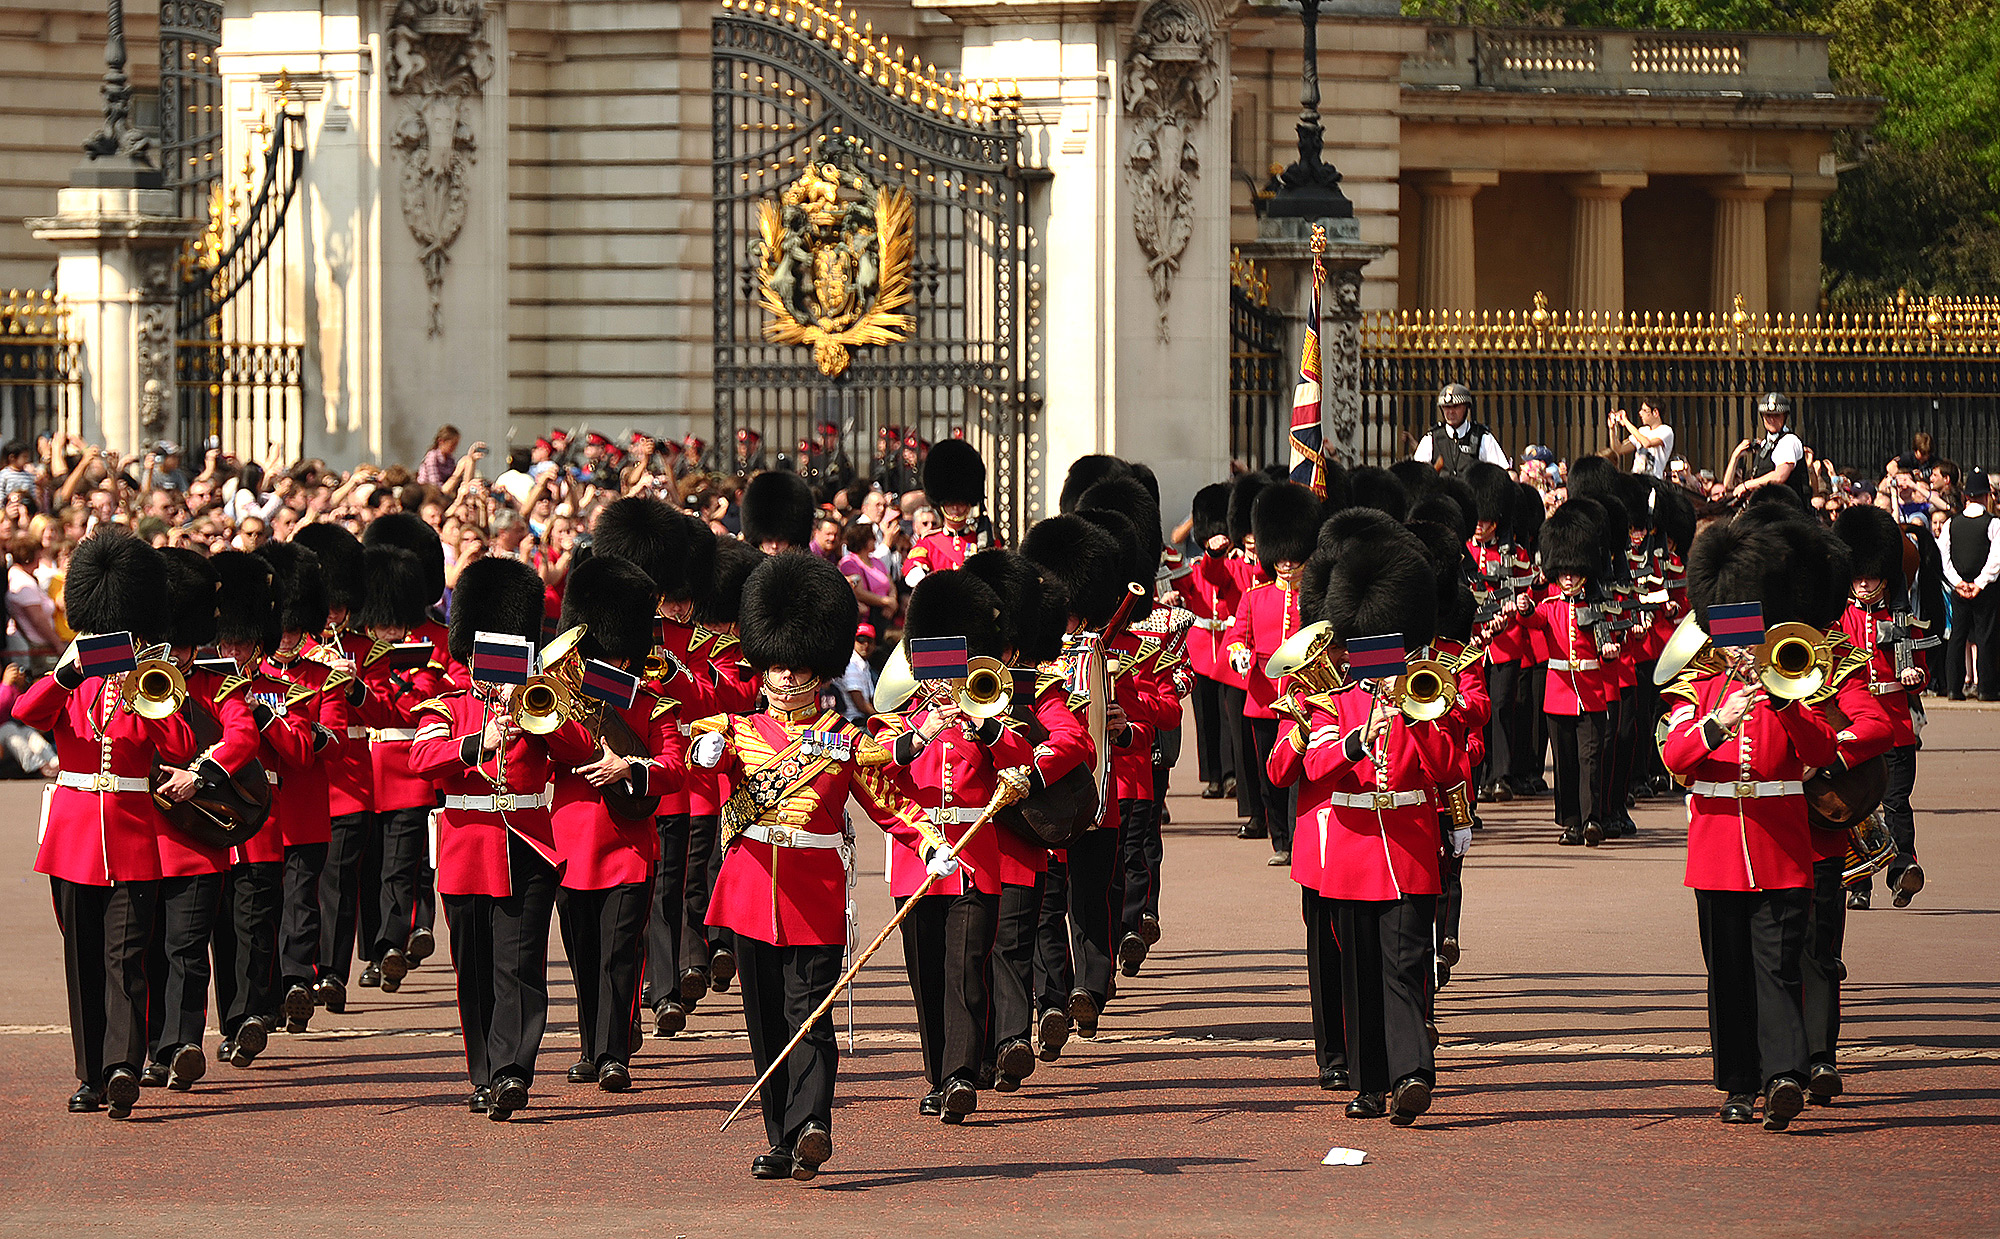 Buckingham Palace Hosts 1st Changing of the Guard since COVID-19 began